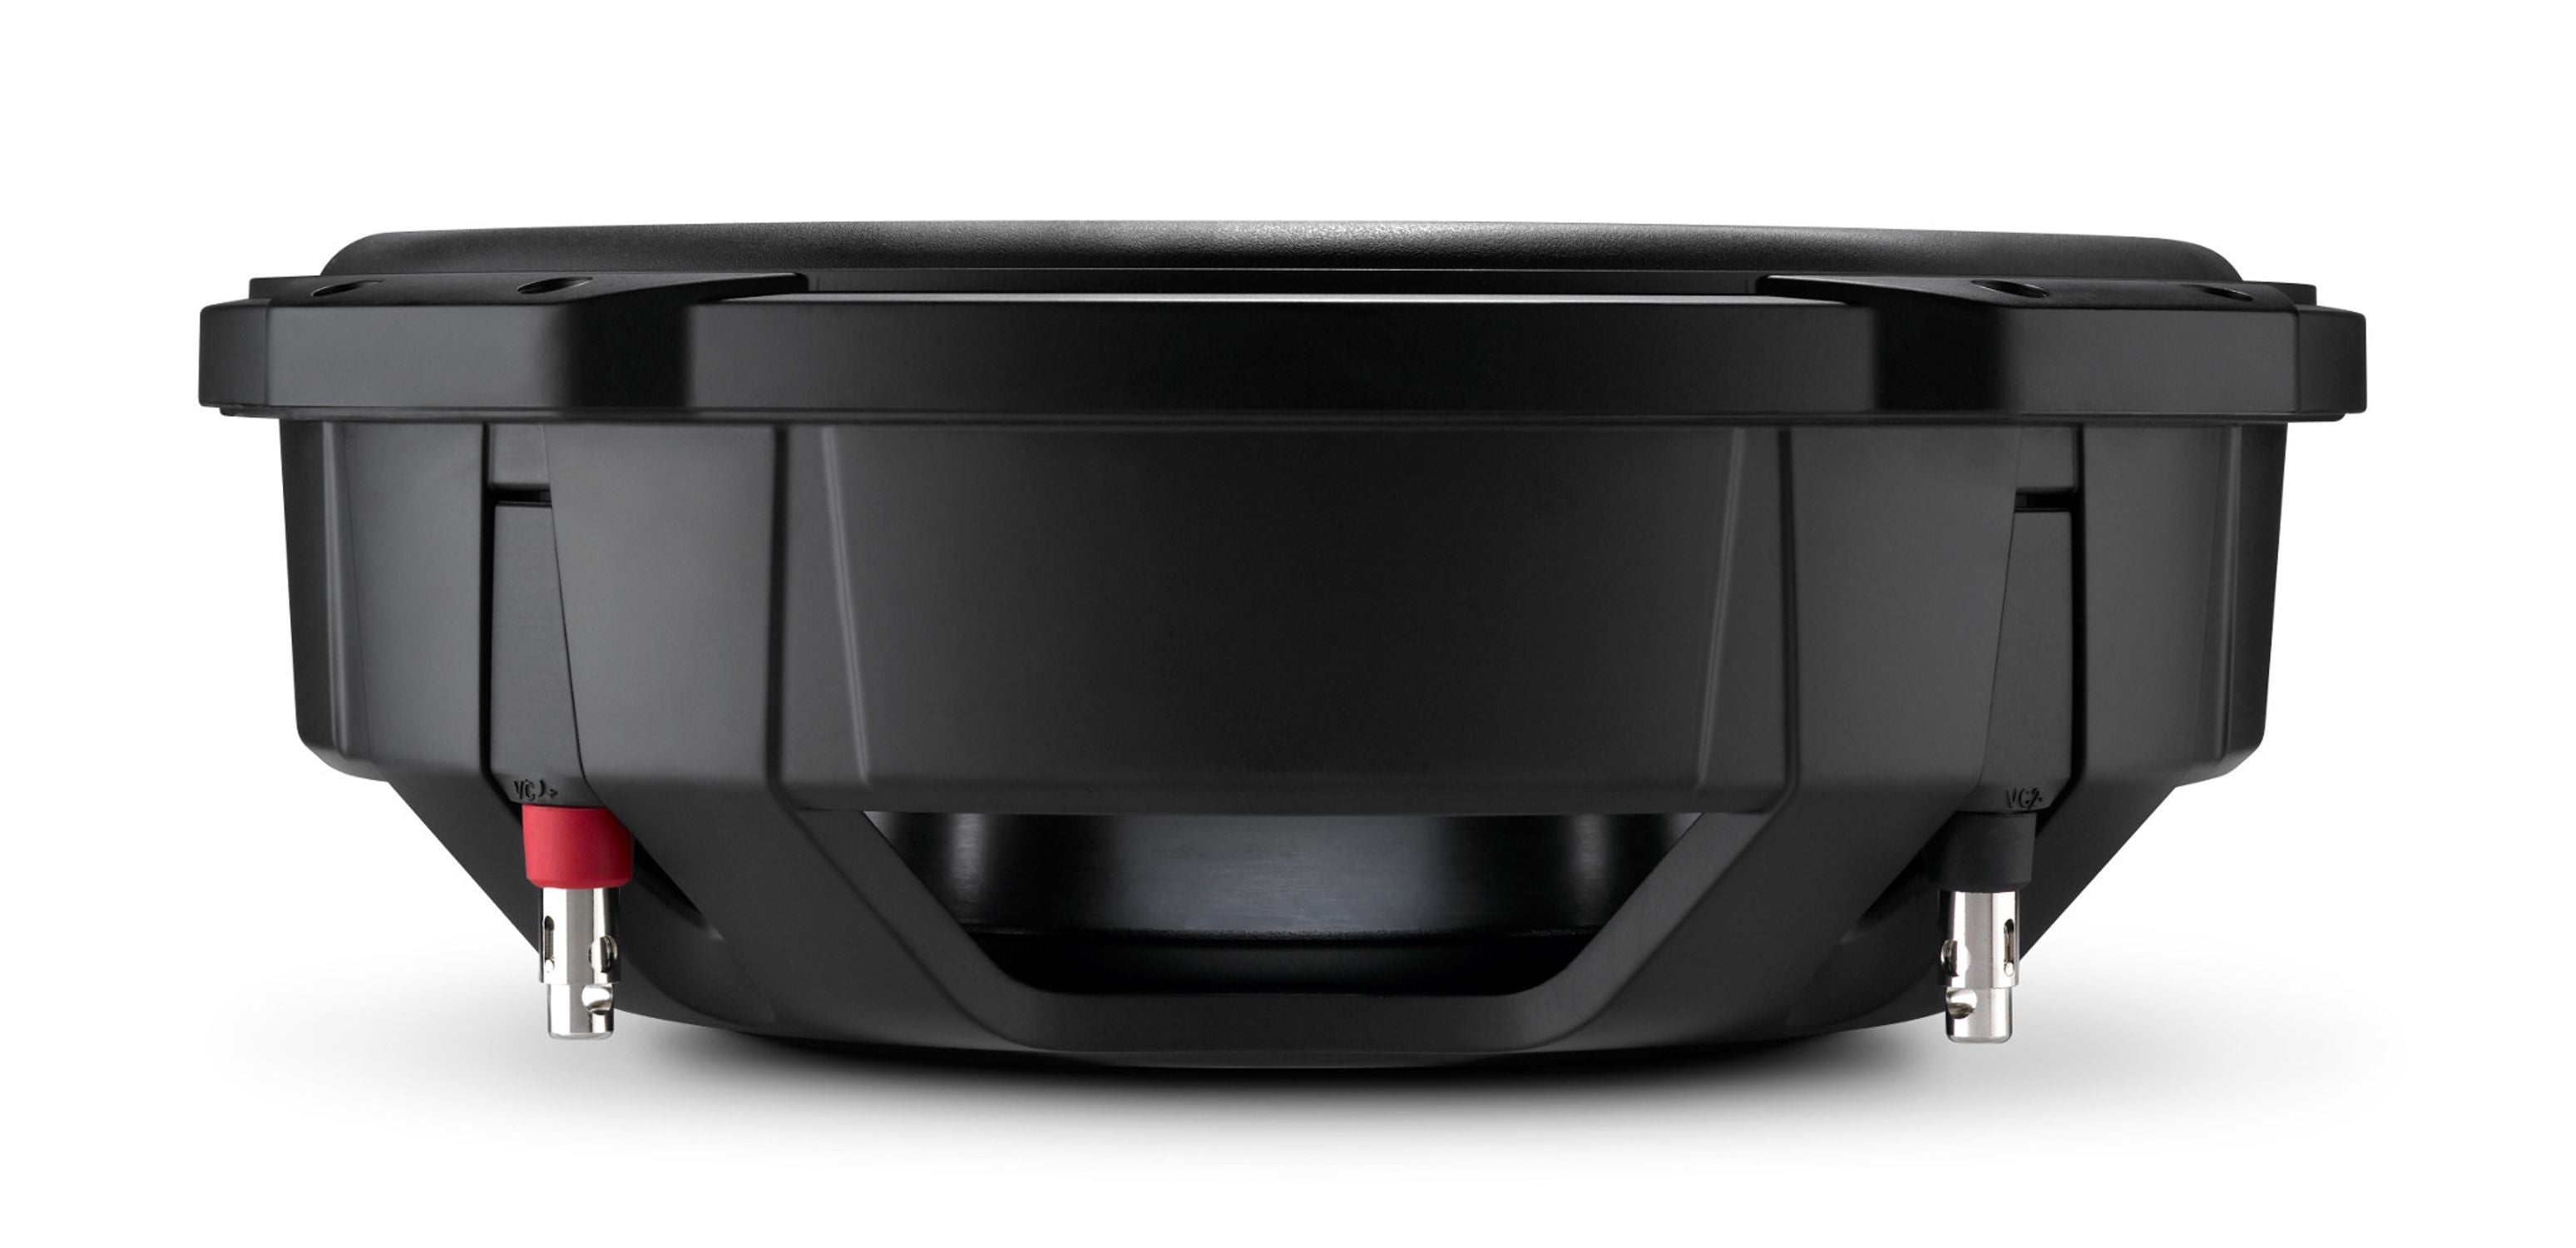 Profile of 12TW3 Subwoofer